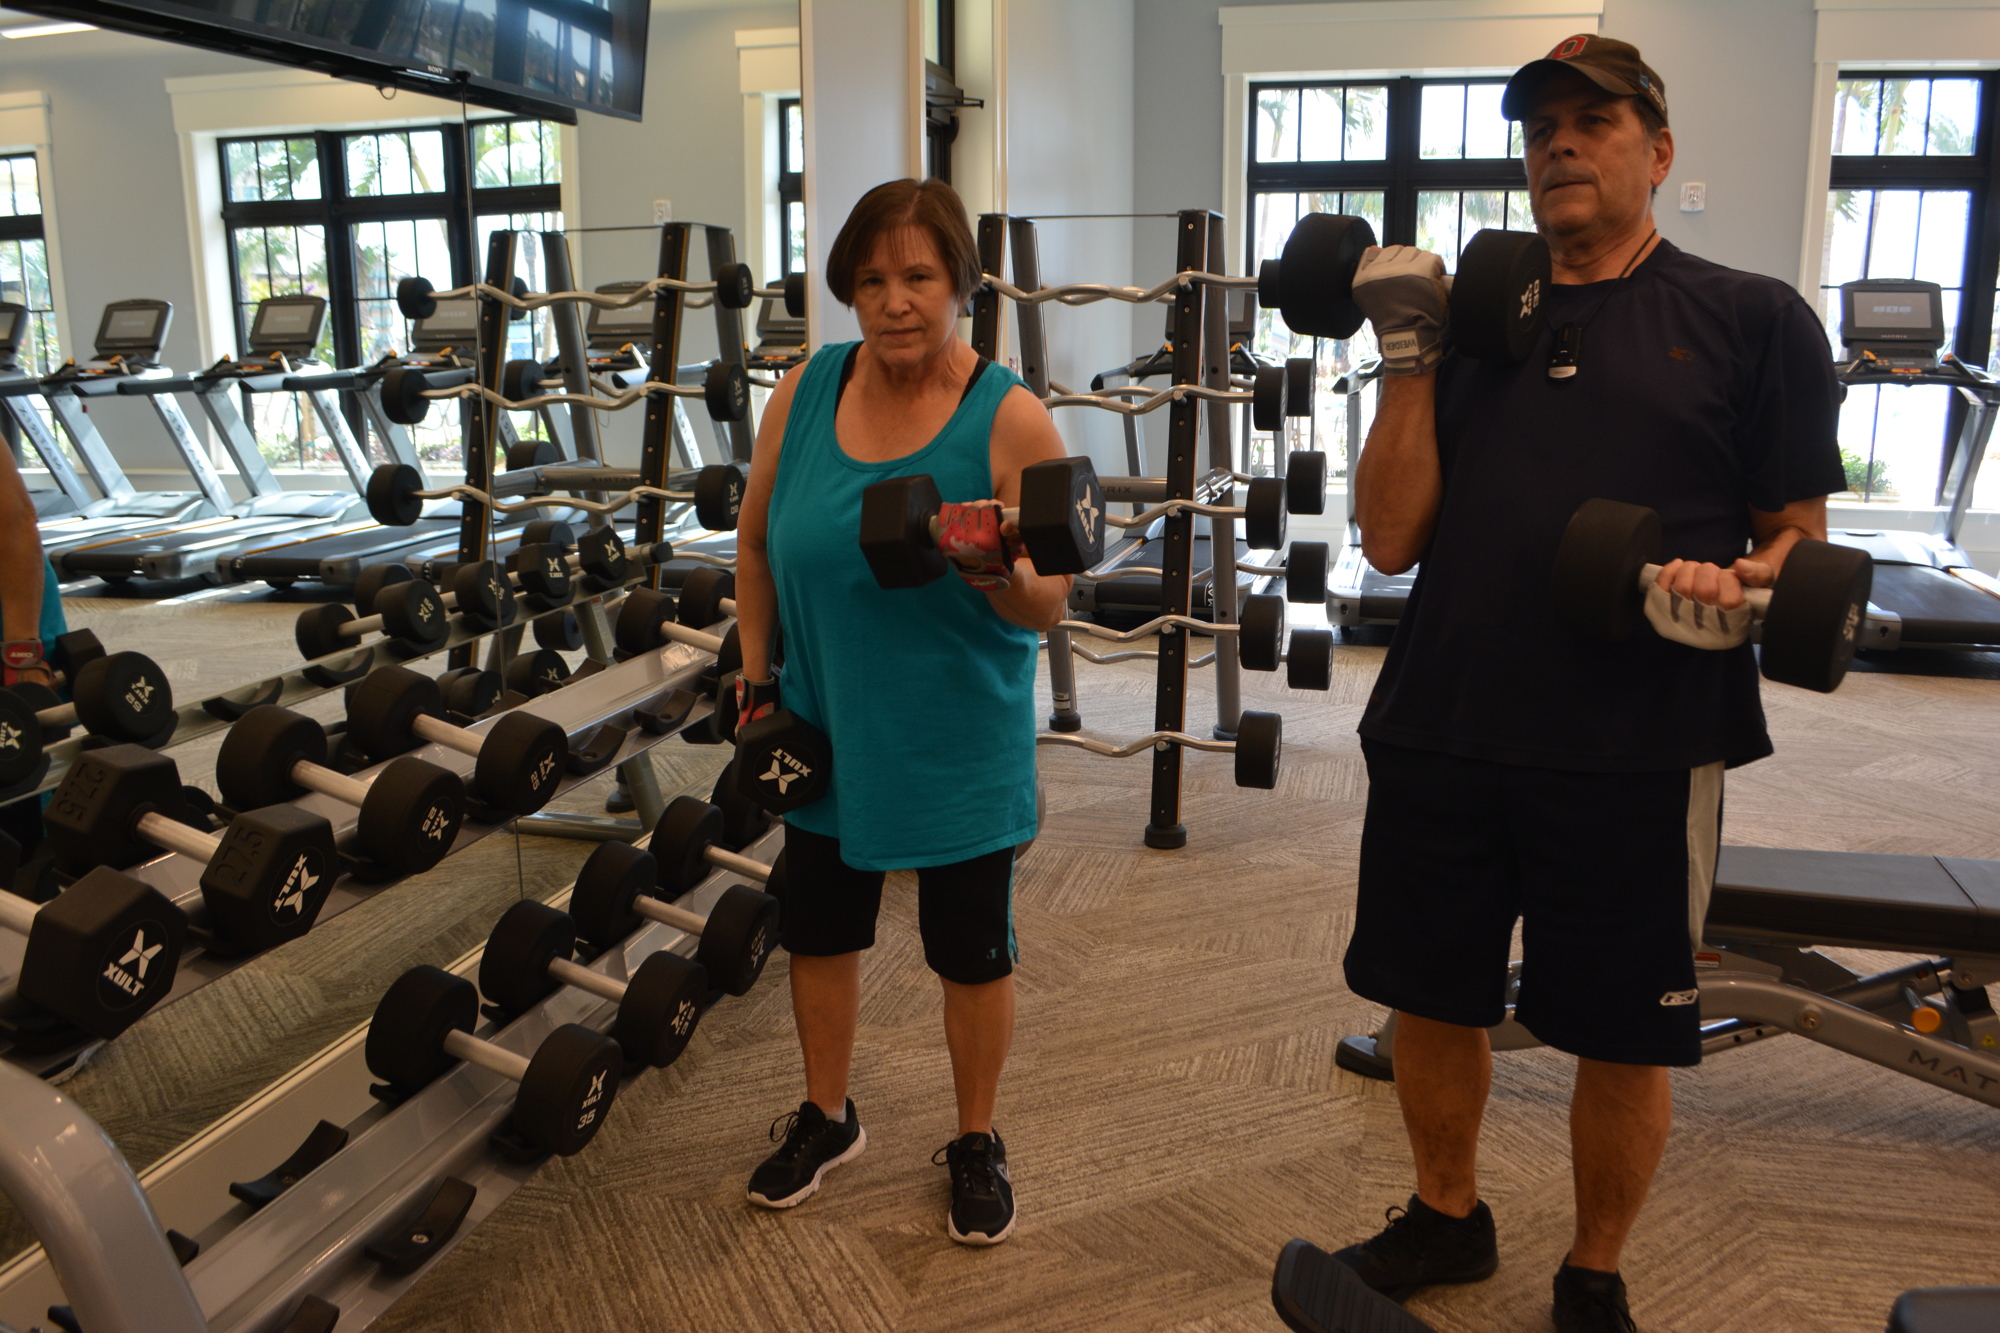 Del Webb residents Charlene and Chris Moretto said they love the new clubhouse's facilities.